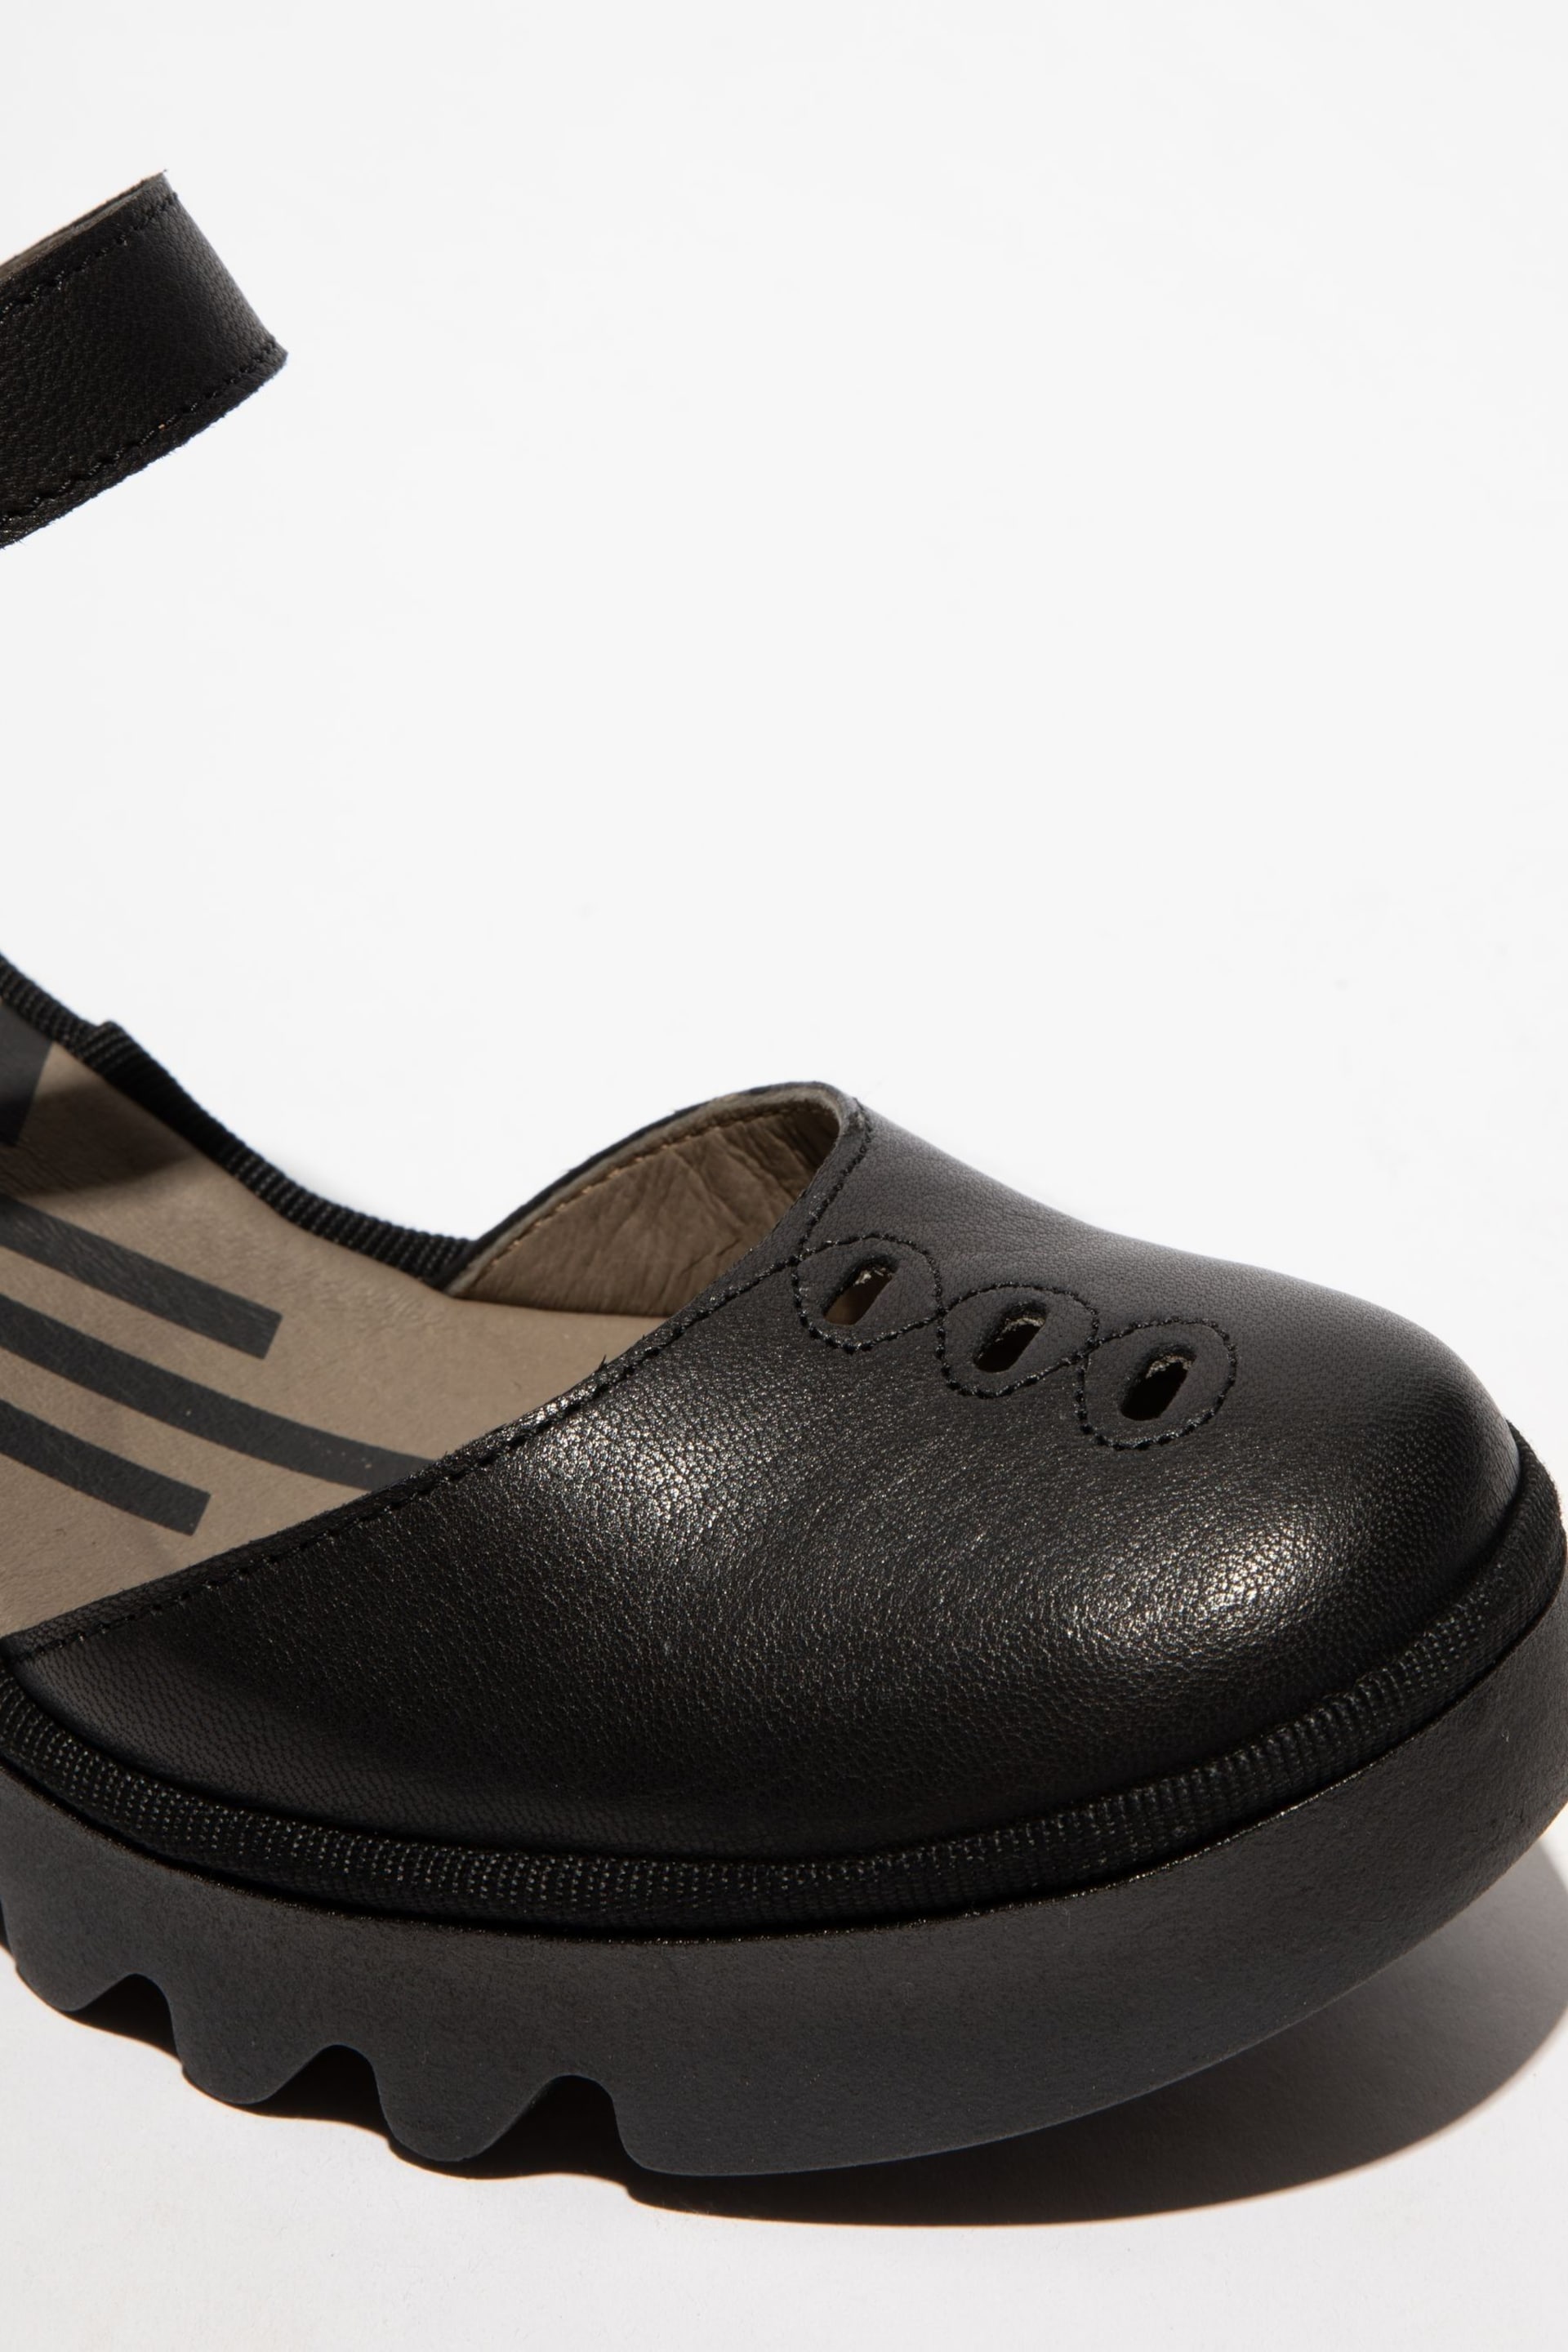 Fly London Black Biso Wedge Shoes - Image 4 of 4